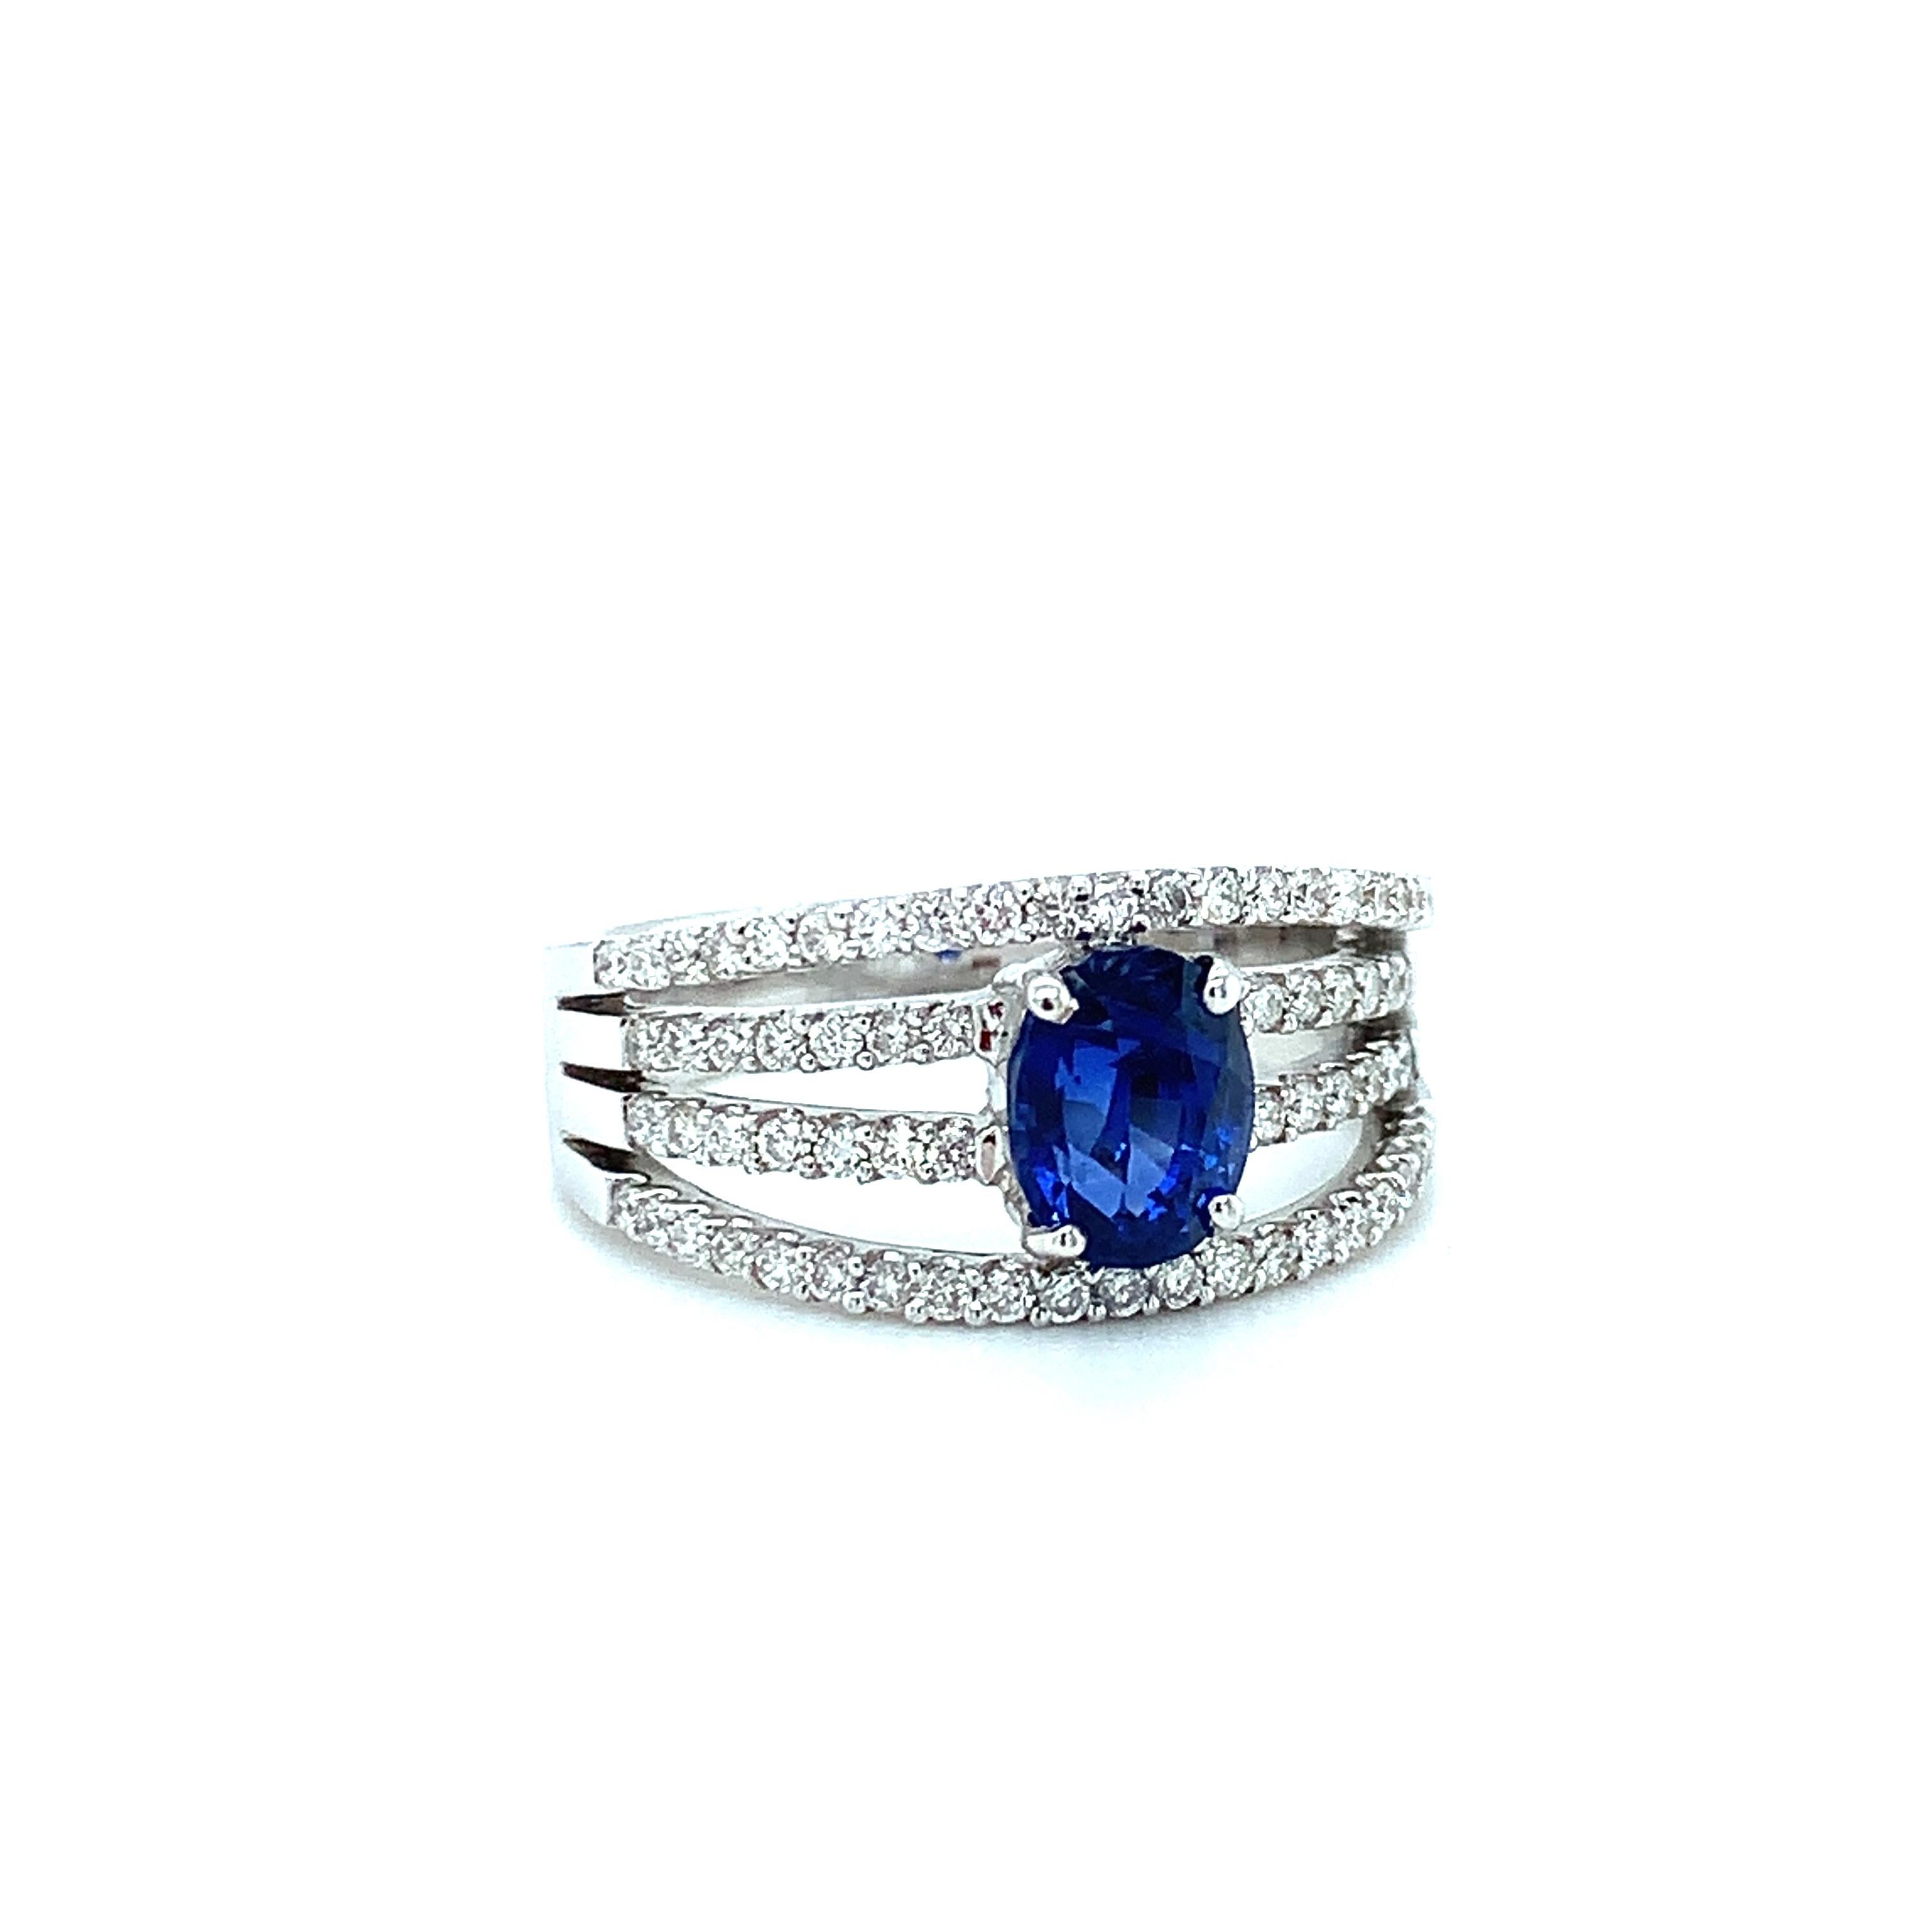 Artisan Royal Blue Sapphire and 4-Row Diamond Engagement Ring in White Gold, 1.56 Carat  For Sale